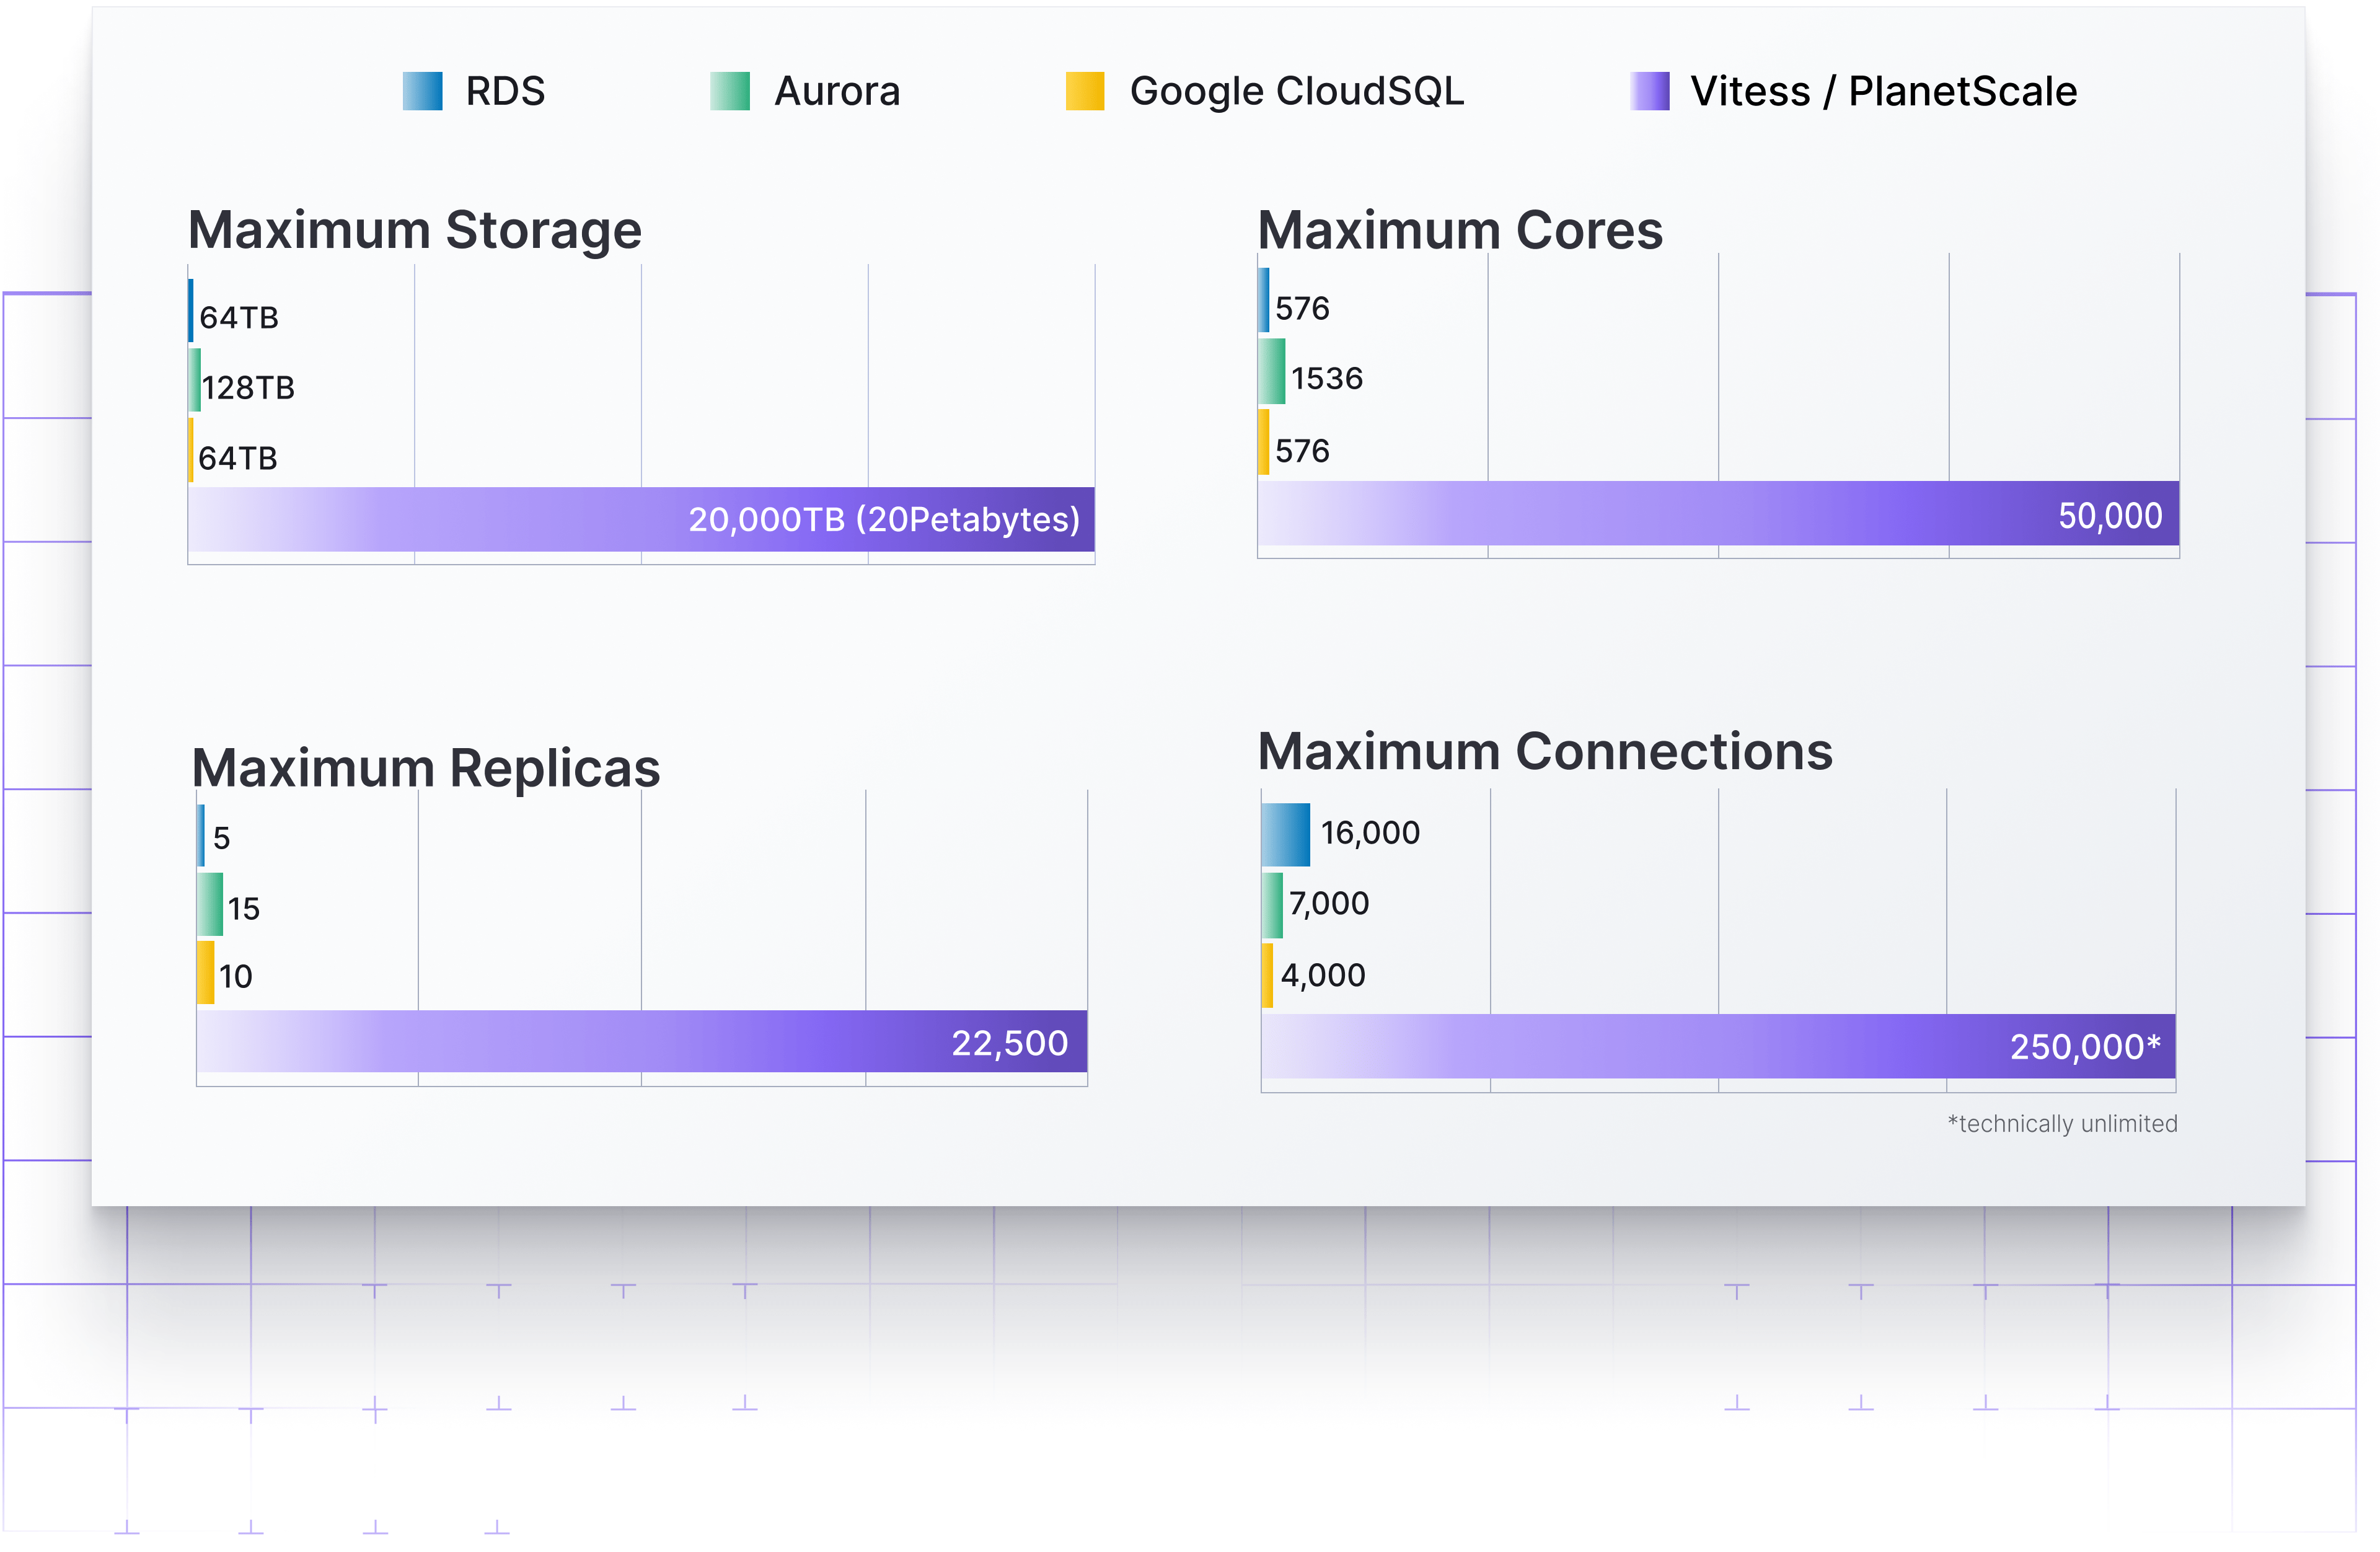 Graphs showing comparisons for maximum storage, maximum cores, maximum replicas, and maximum connections for RDS, Aurora, Google CloudSQL, and Vitess/PlanetScale. PlanetScale leads in all categories by far.